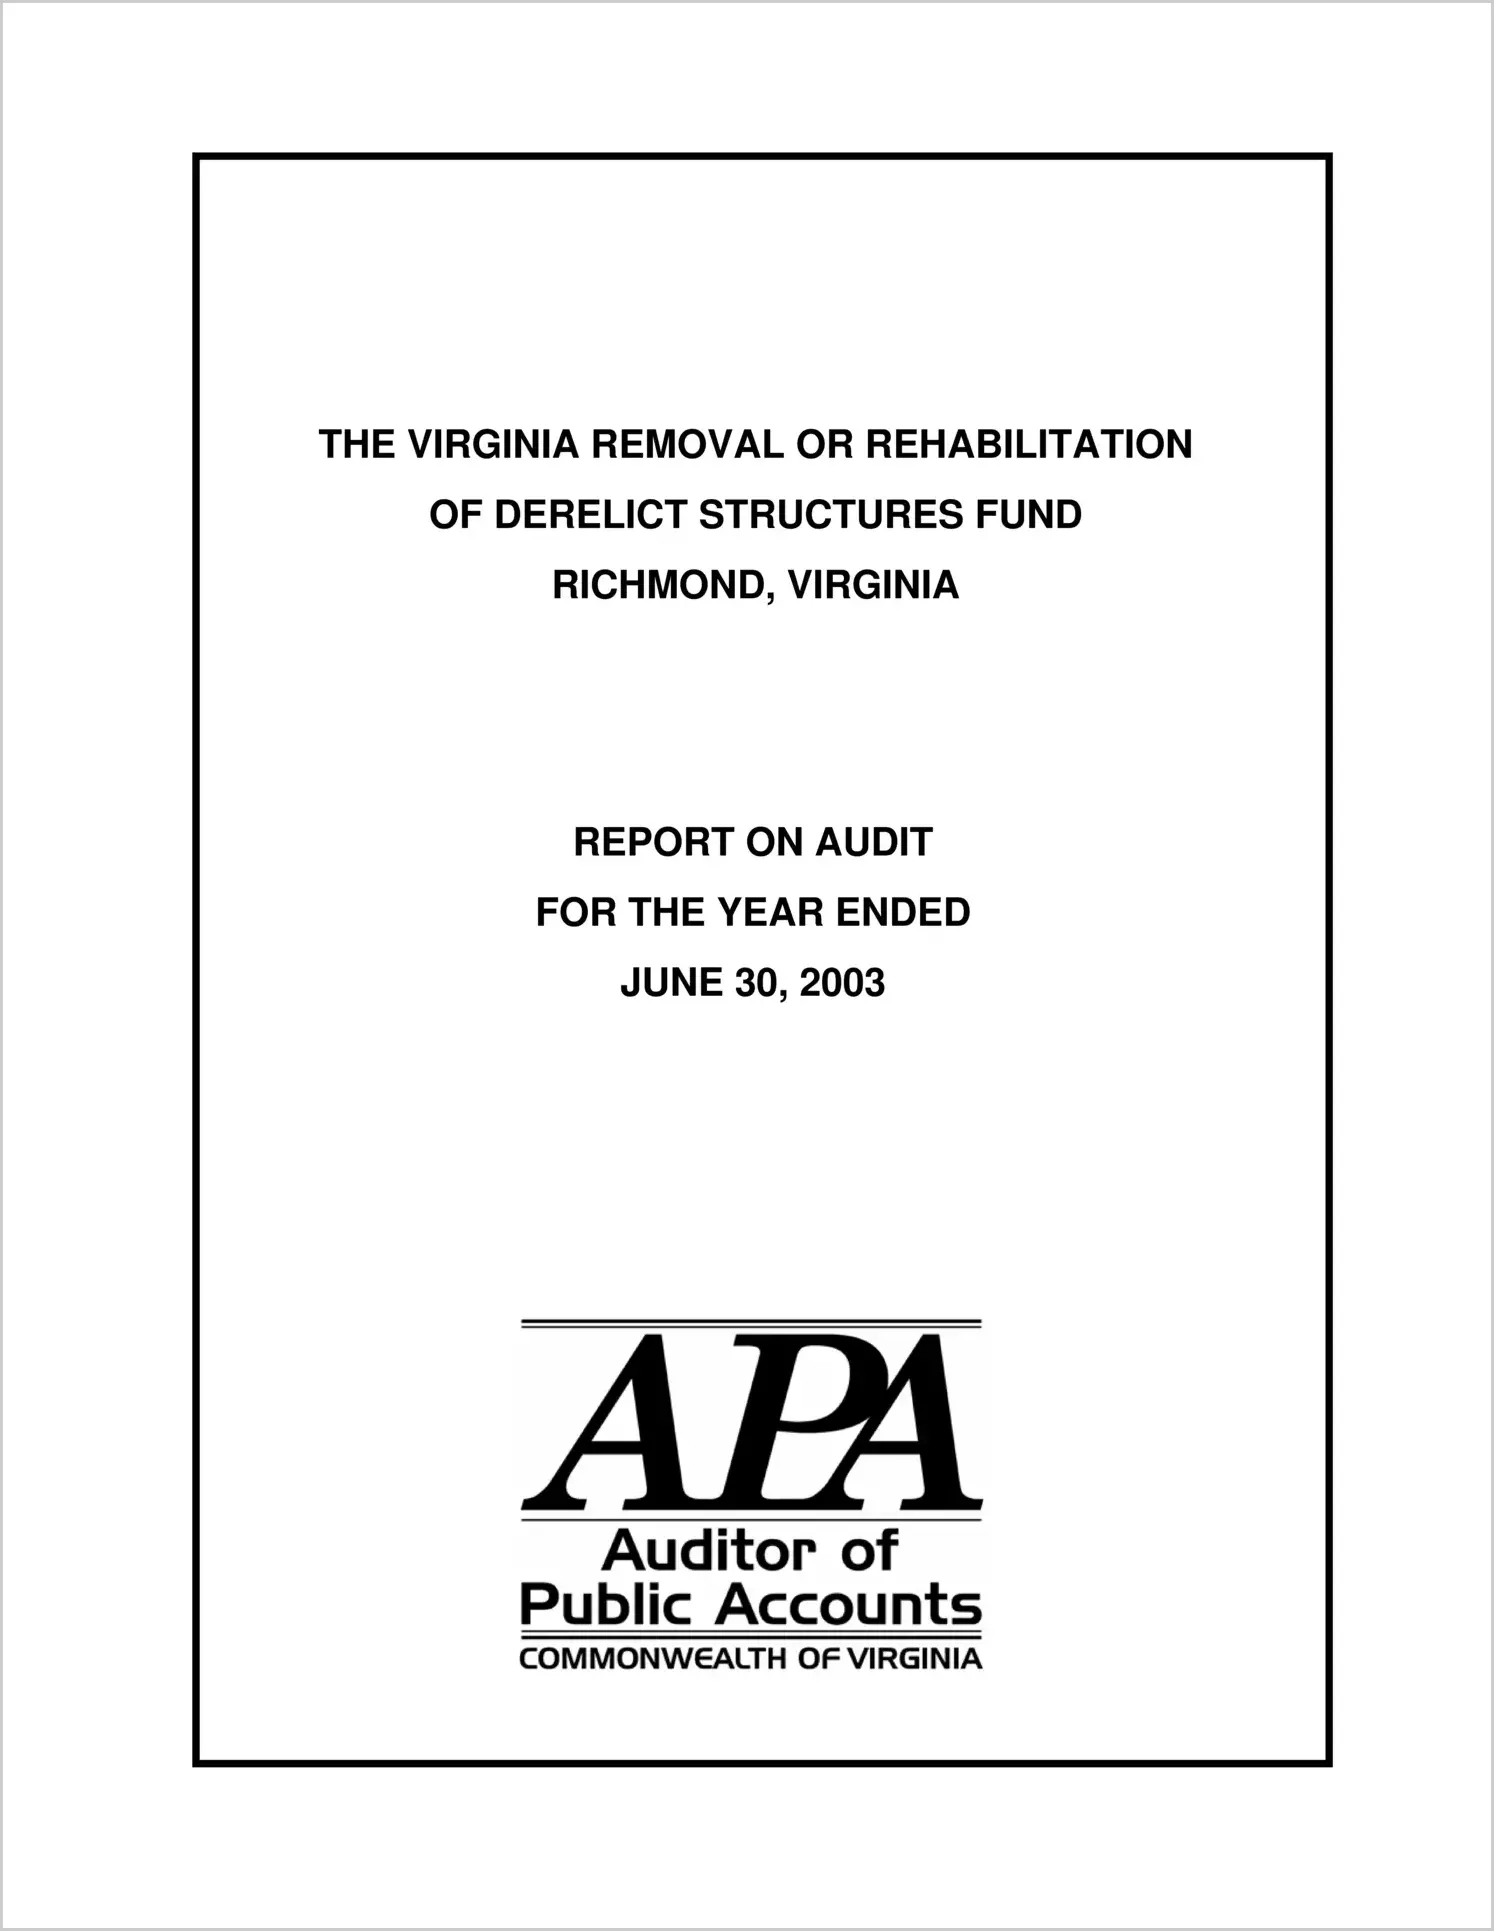 Virginia Removal or Rehabilitation of Derelict Structures Fund for the year ended June 30, 2003